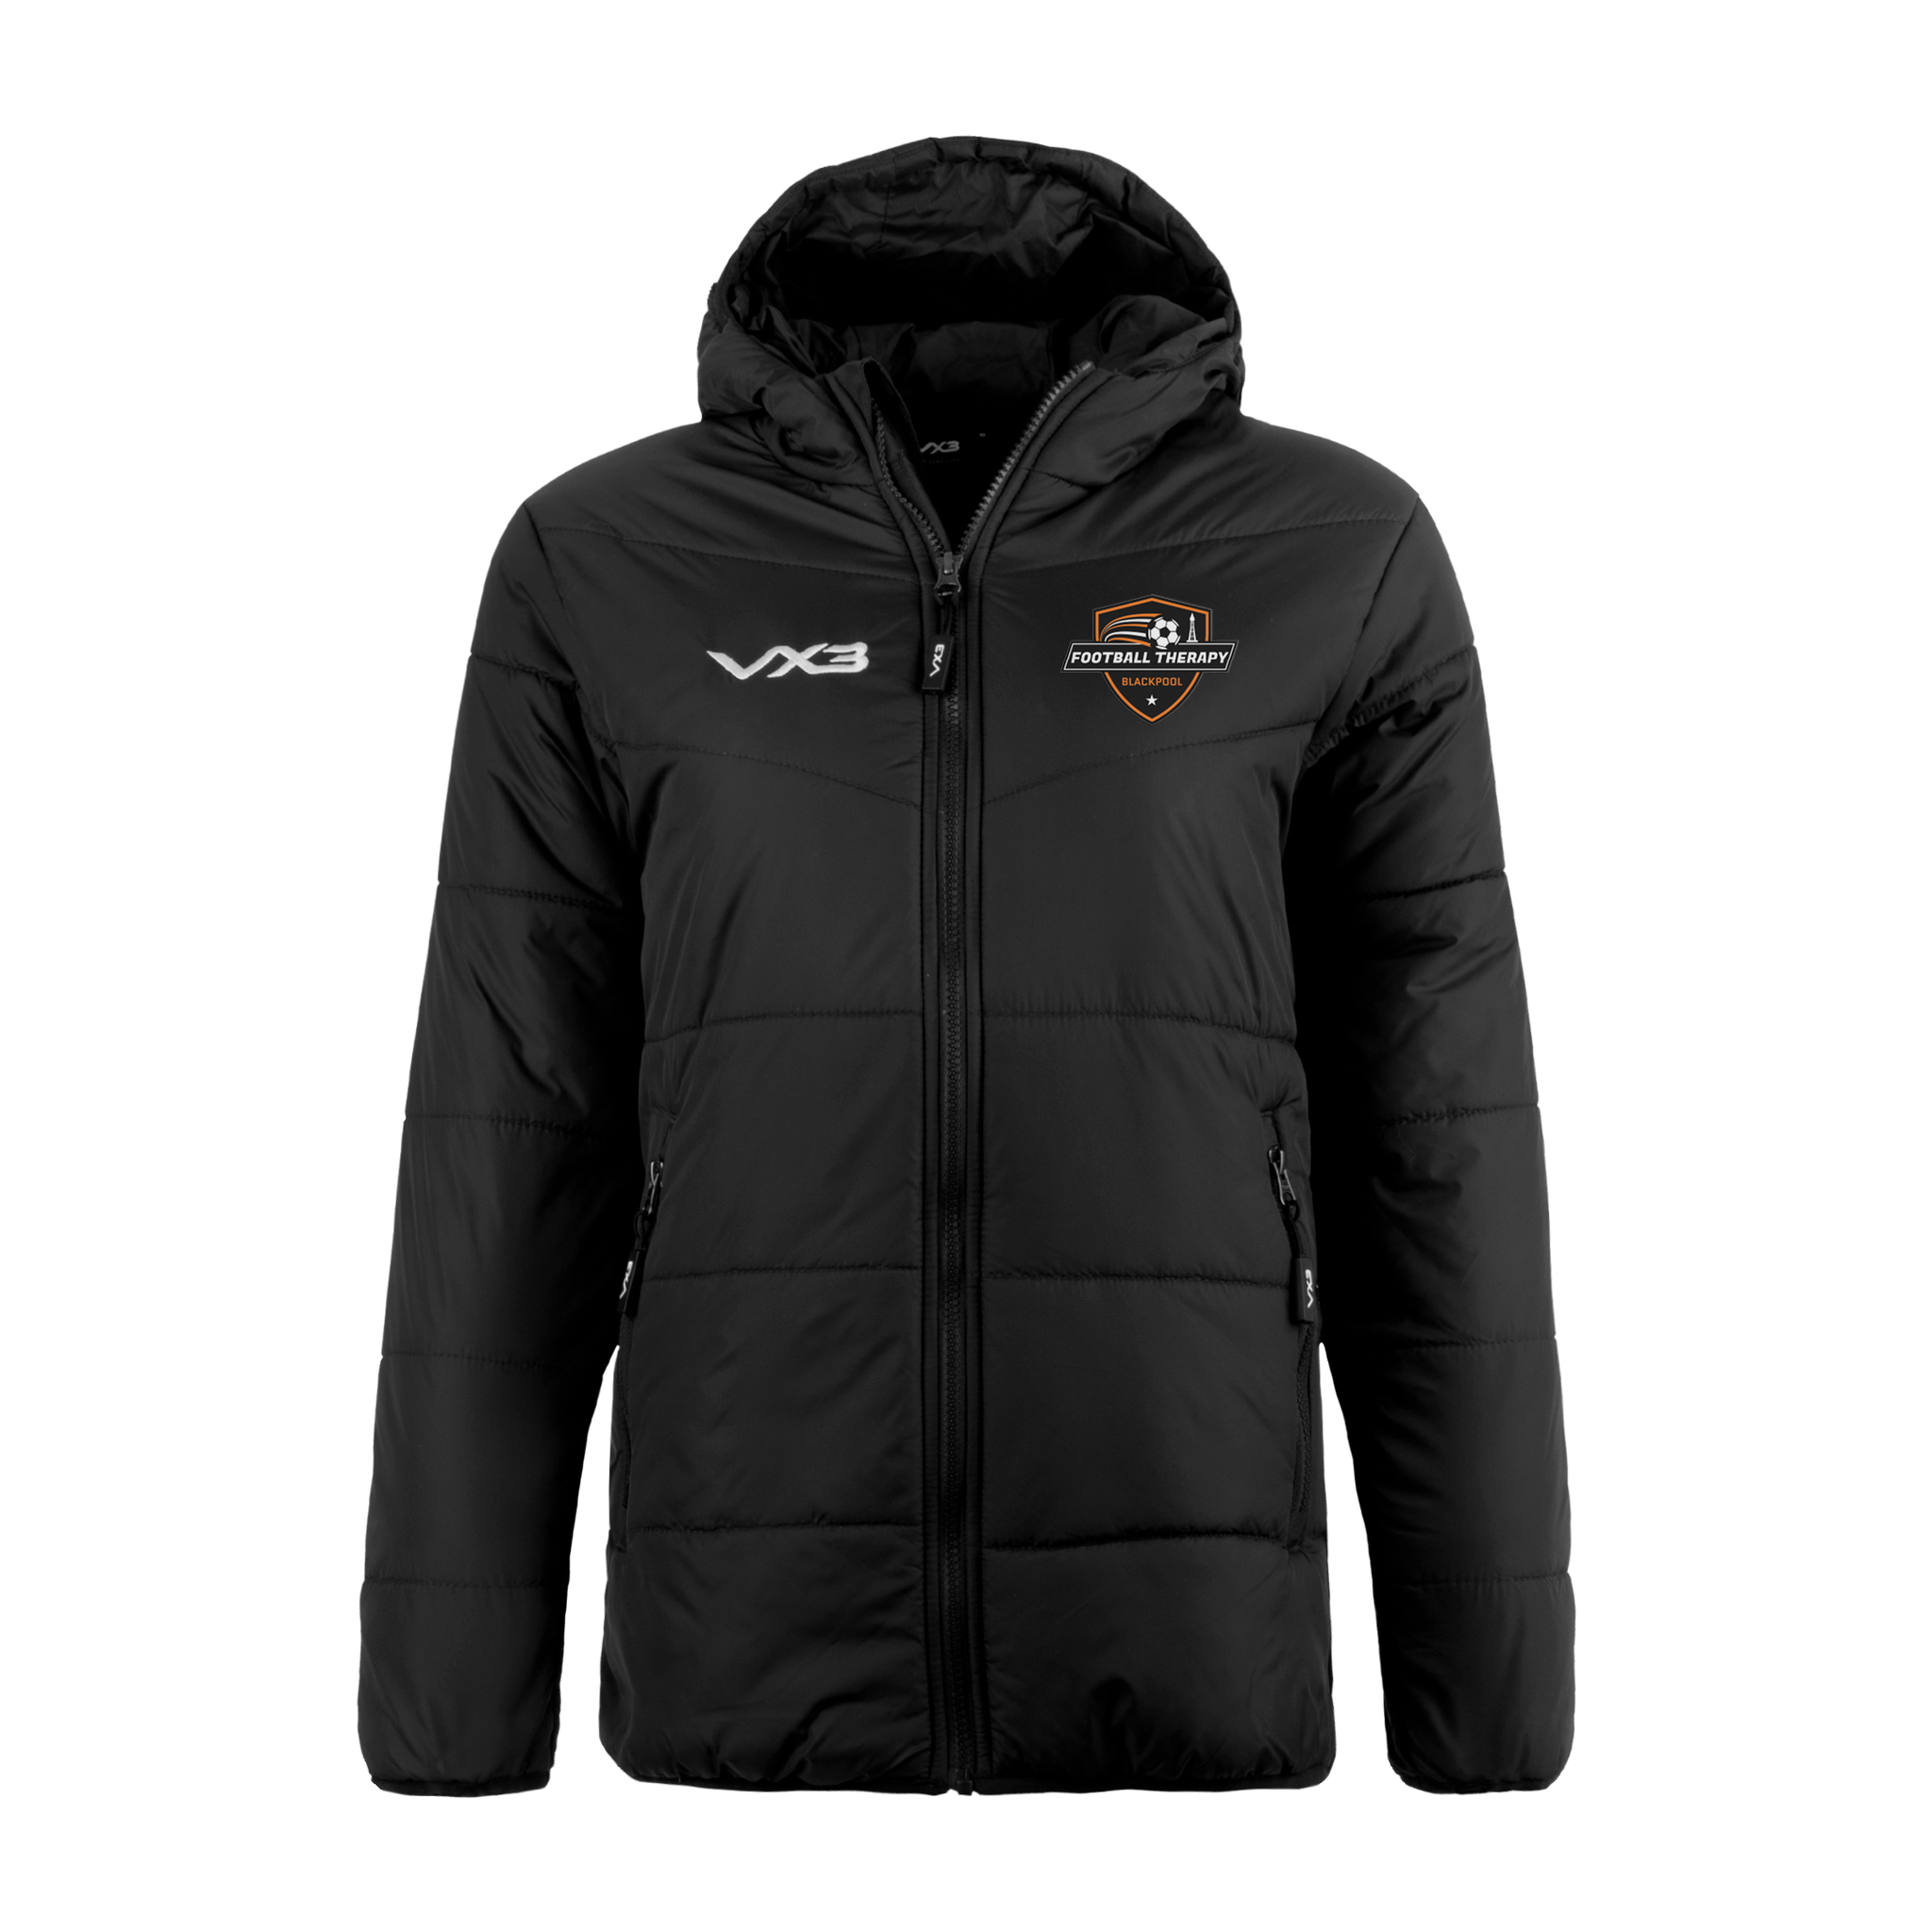 Blackpool Football Therapy Lorica Quilted Jacket Ladies